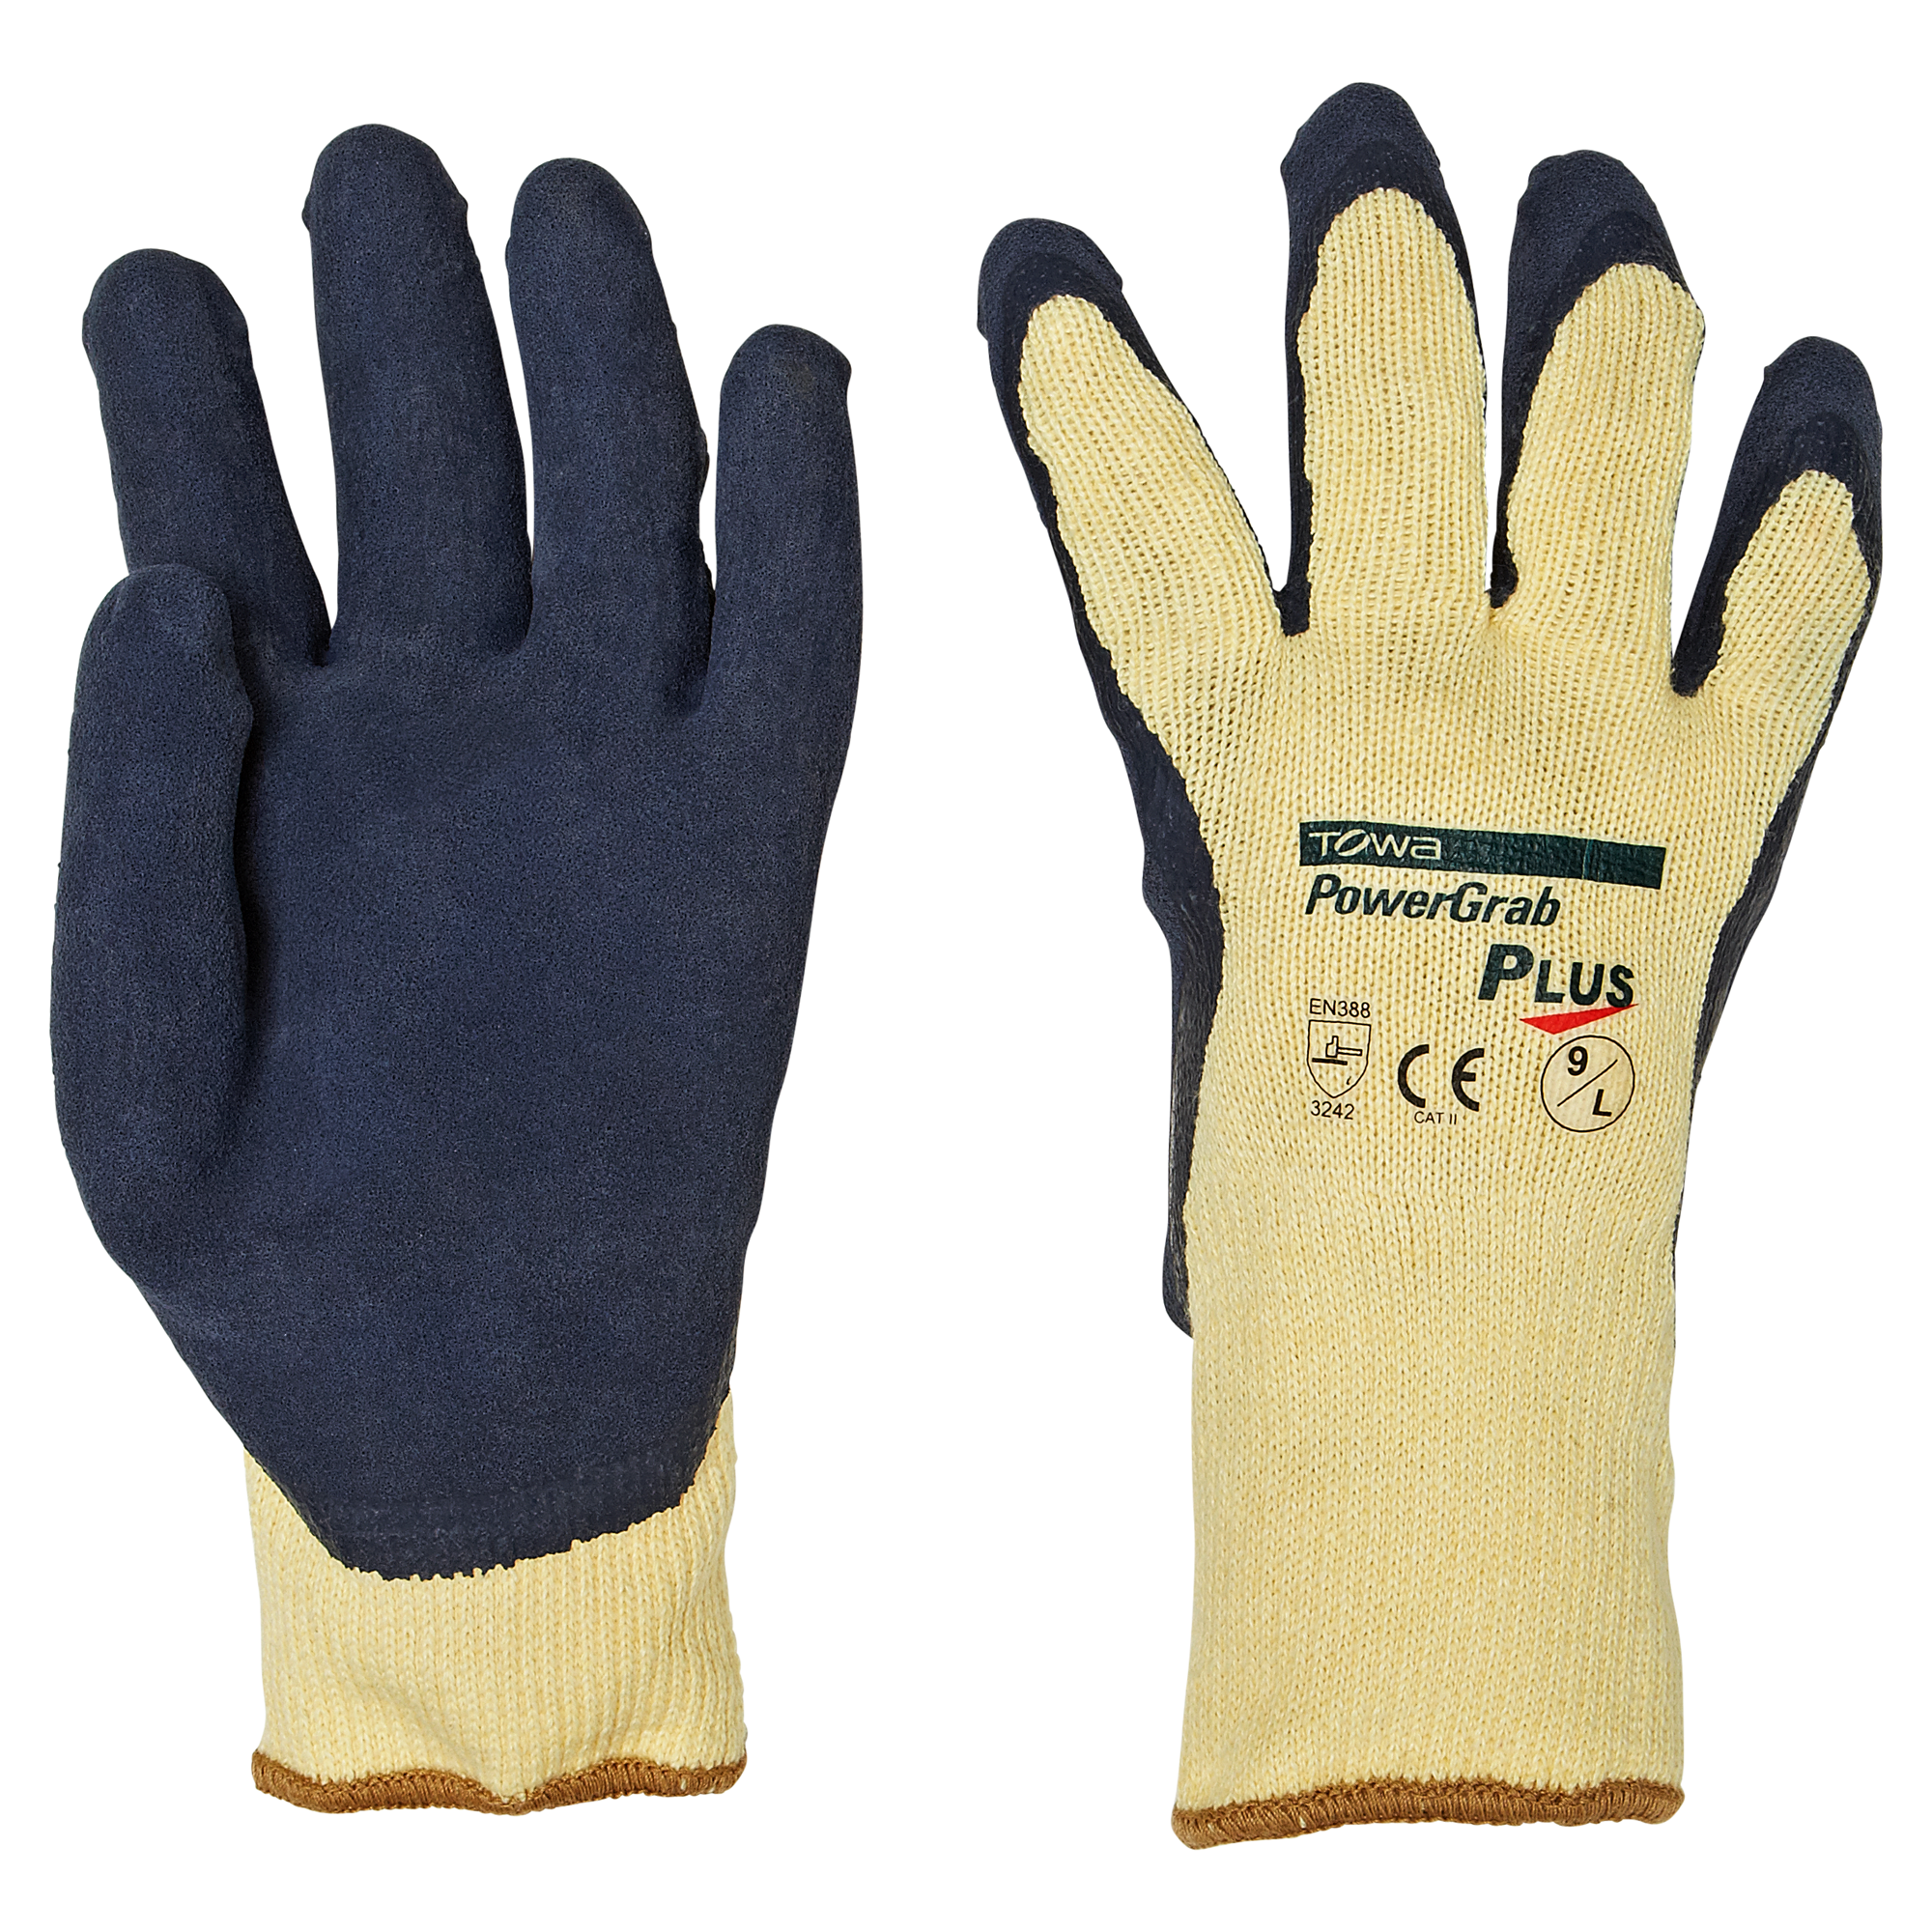 Handschuhe "PowerGrab Plus" Gr. 9 + product picture